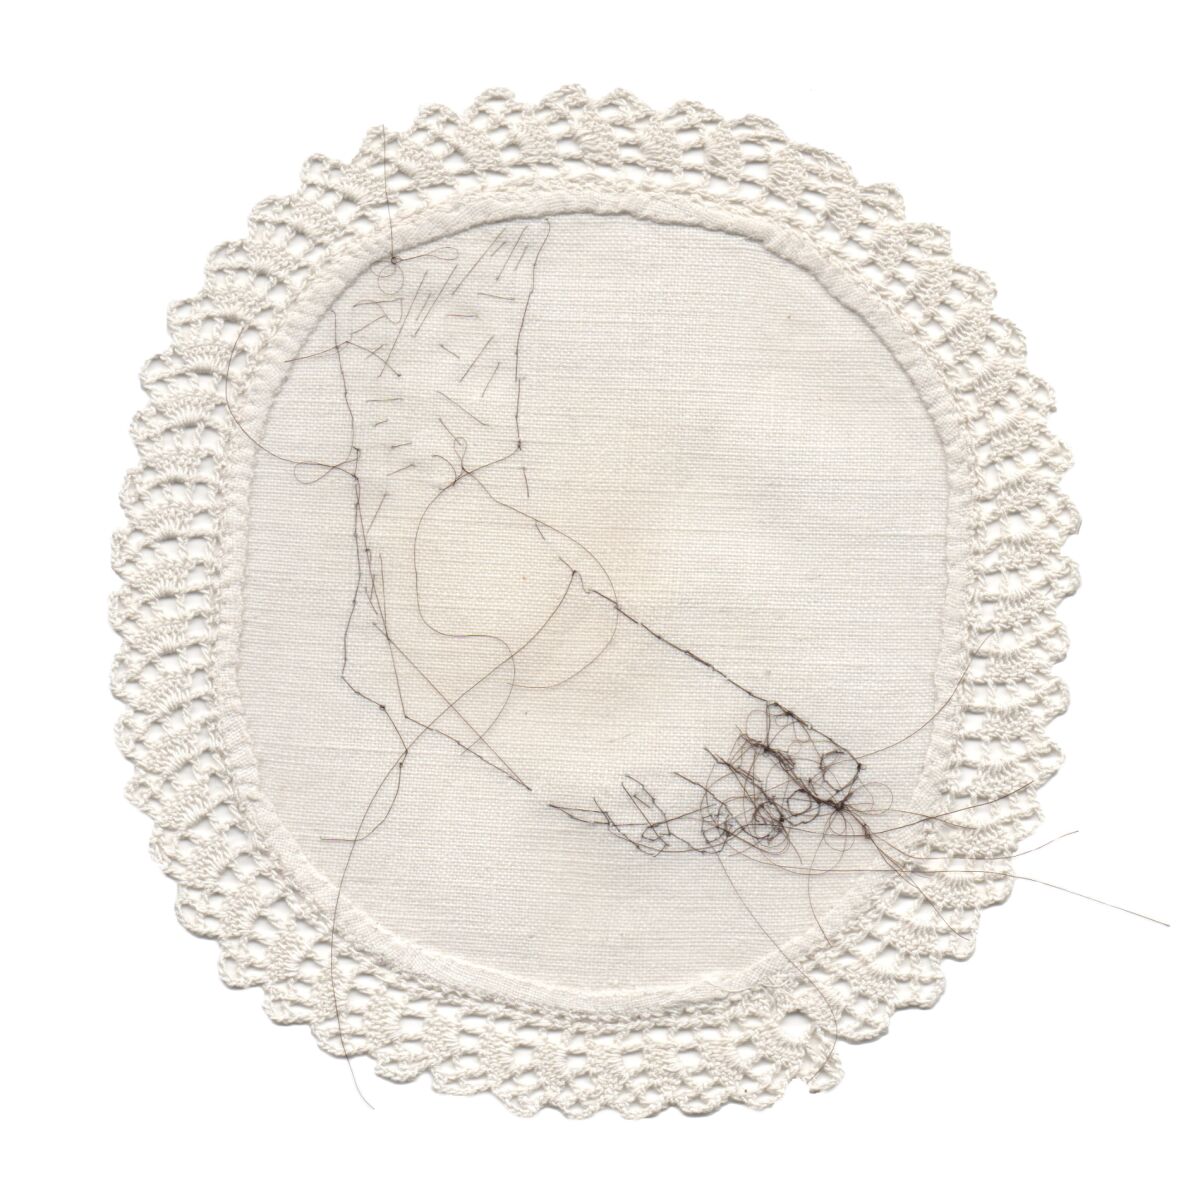 "Untitled," 2014, an embroidery by Sula Bermúdez-Silverman, from her solo show at the California African American Museum.